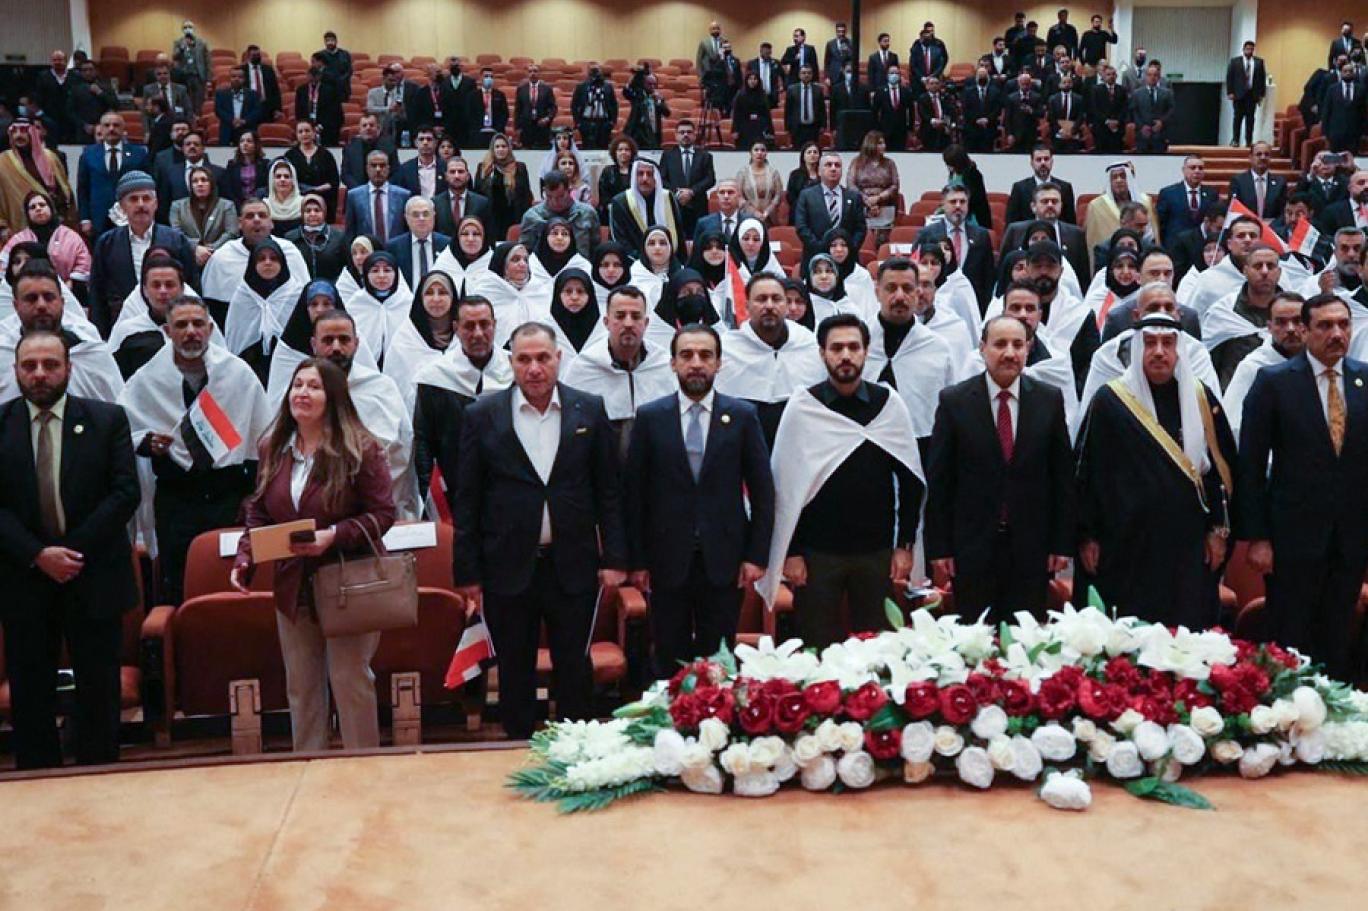 The women of the Iraqi parliament are able to unite to form the largest bloc